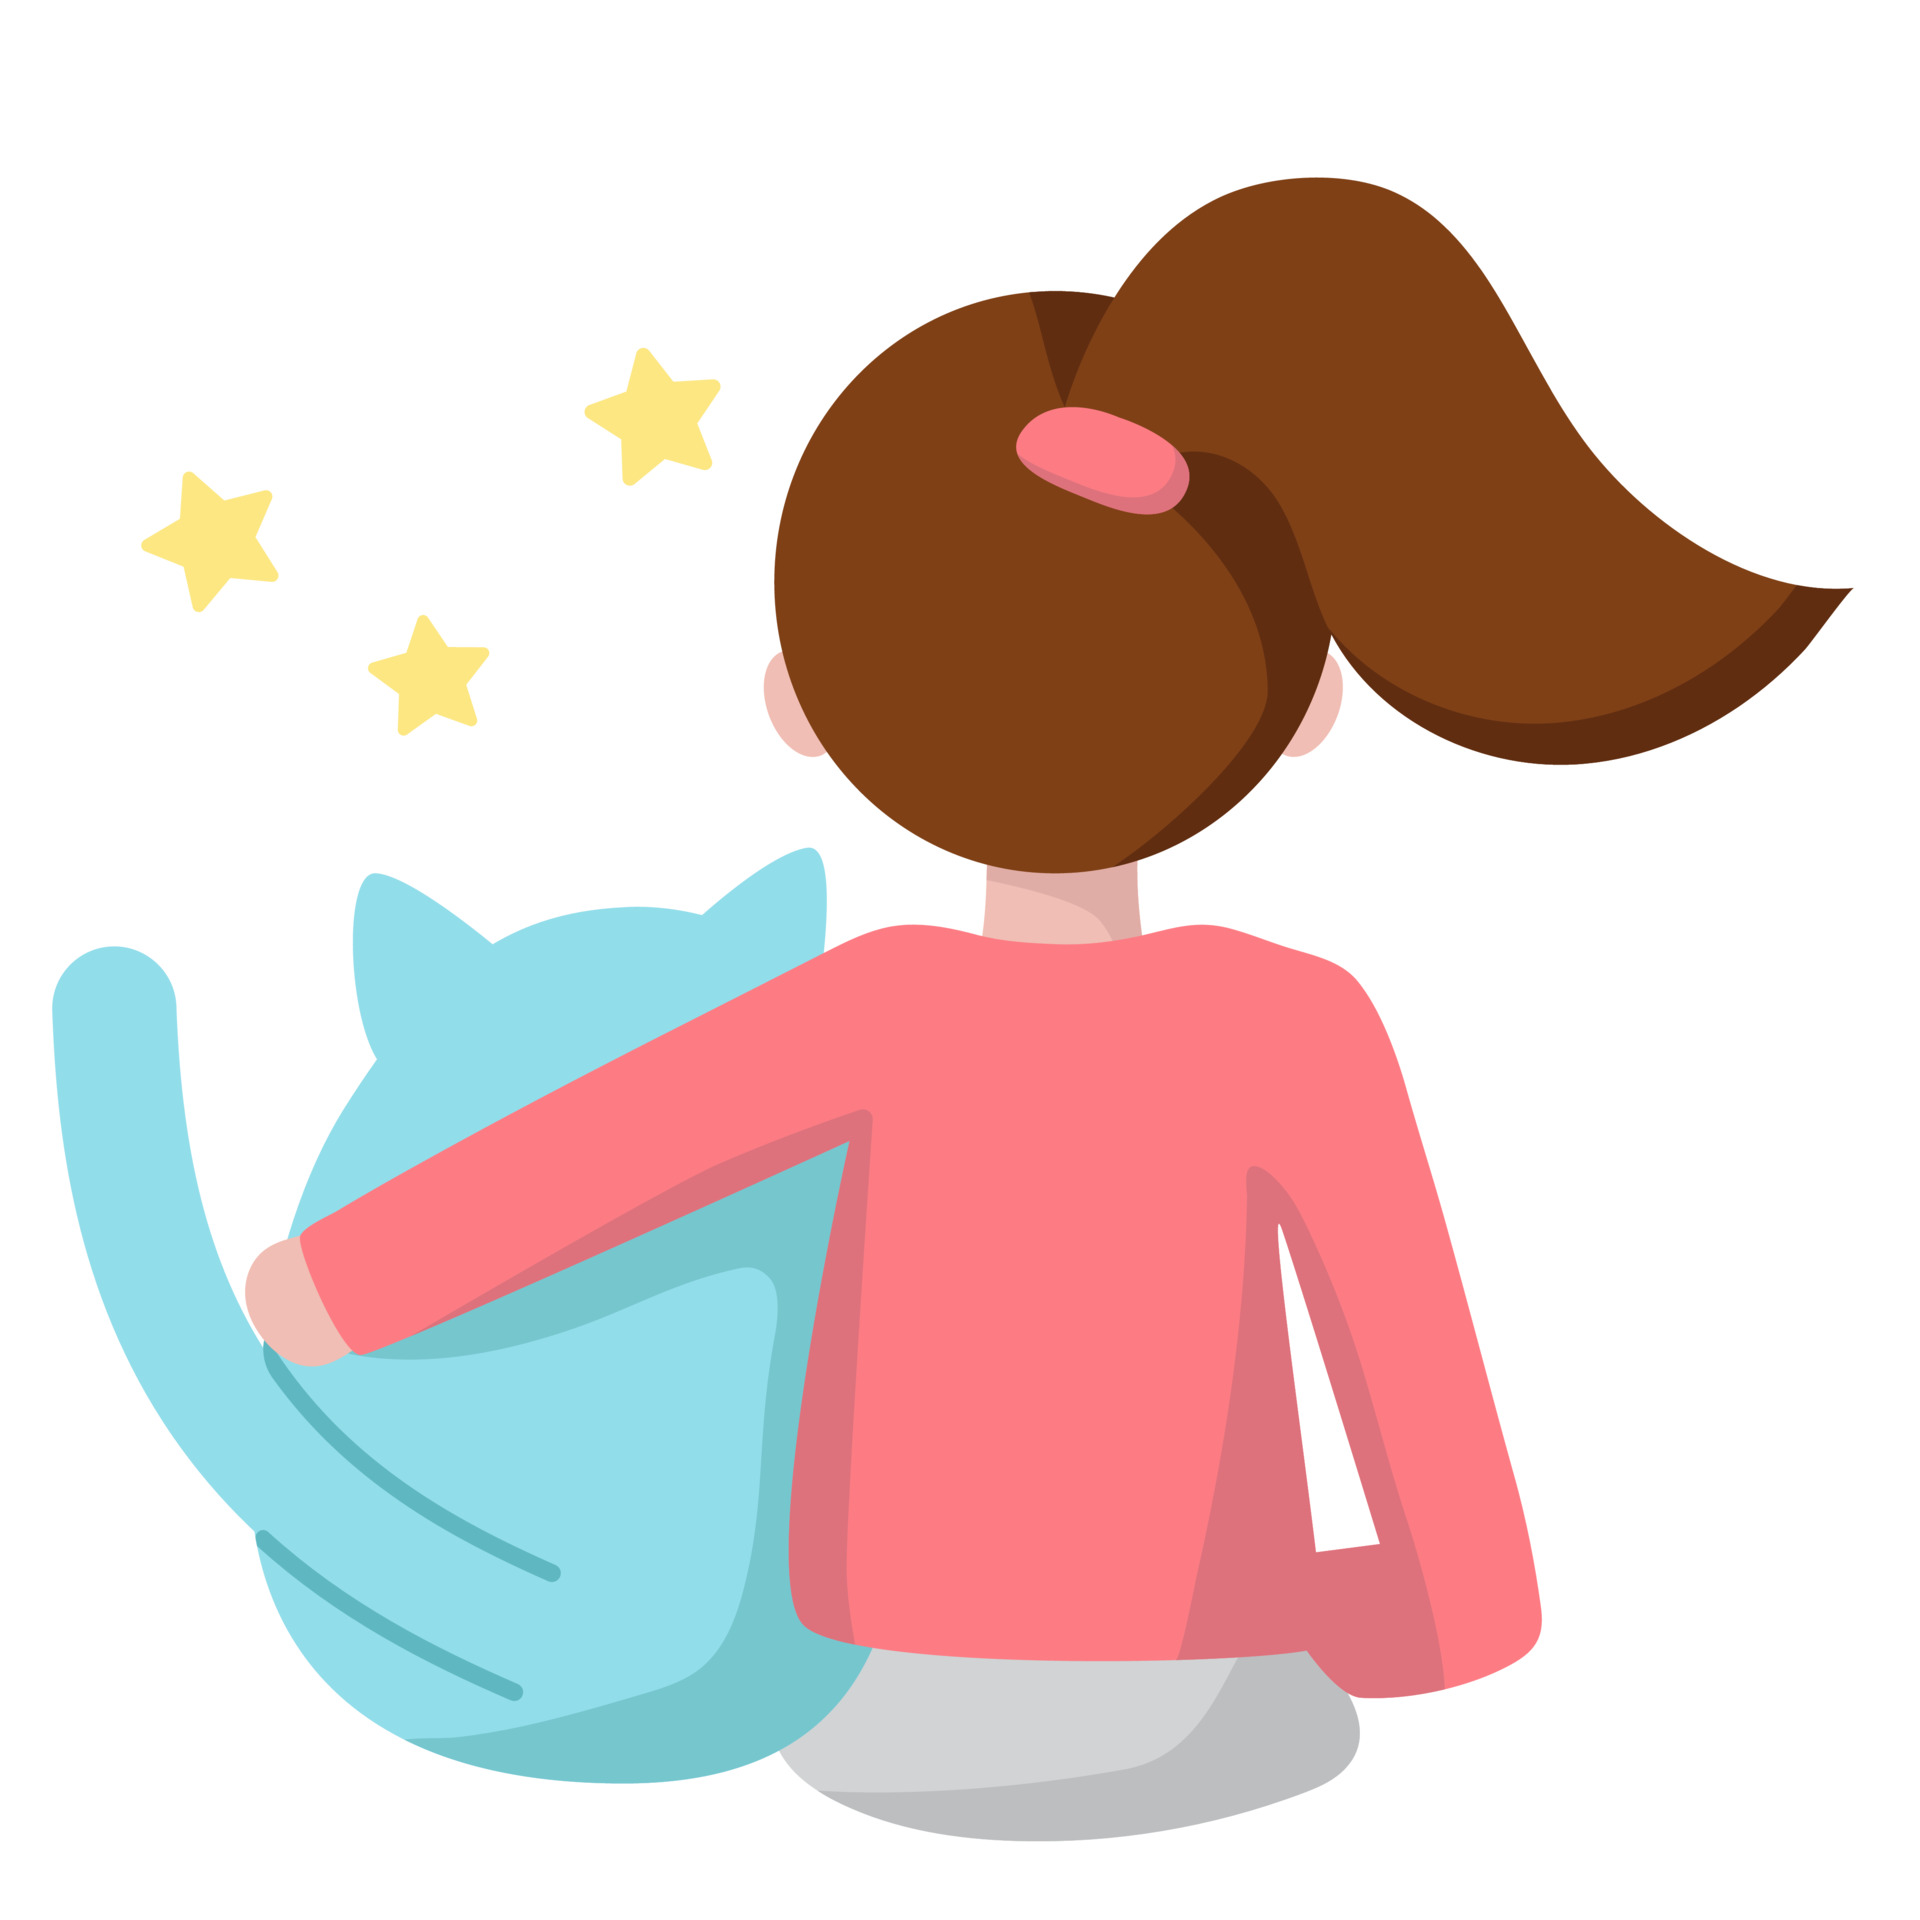 Funny cartoon girl and her cat sitting and watching to stars. Back view.  Flat style illustration for sticker pack, emoji. Best friends, home pets  concept. Print for textile, banner, cards, decor 3695059